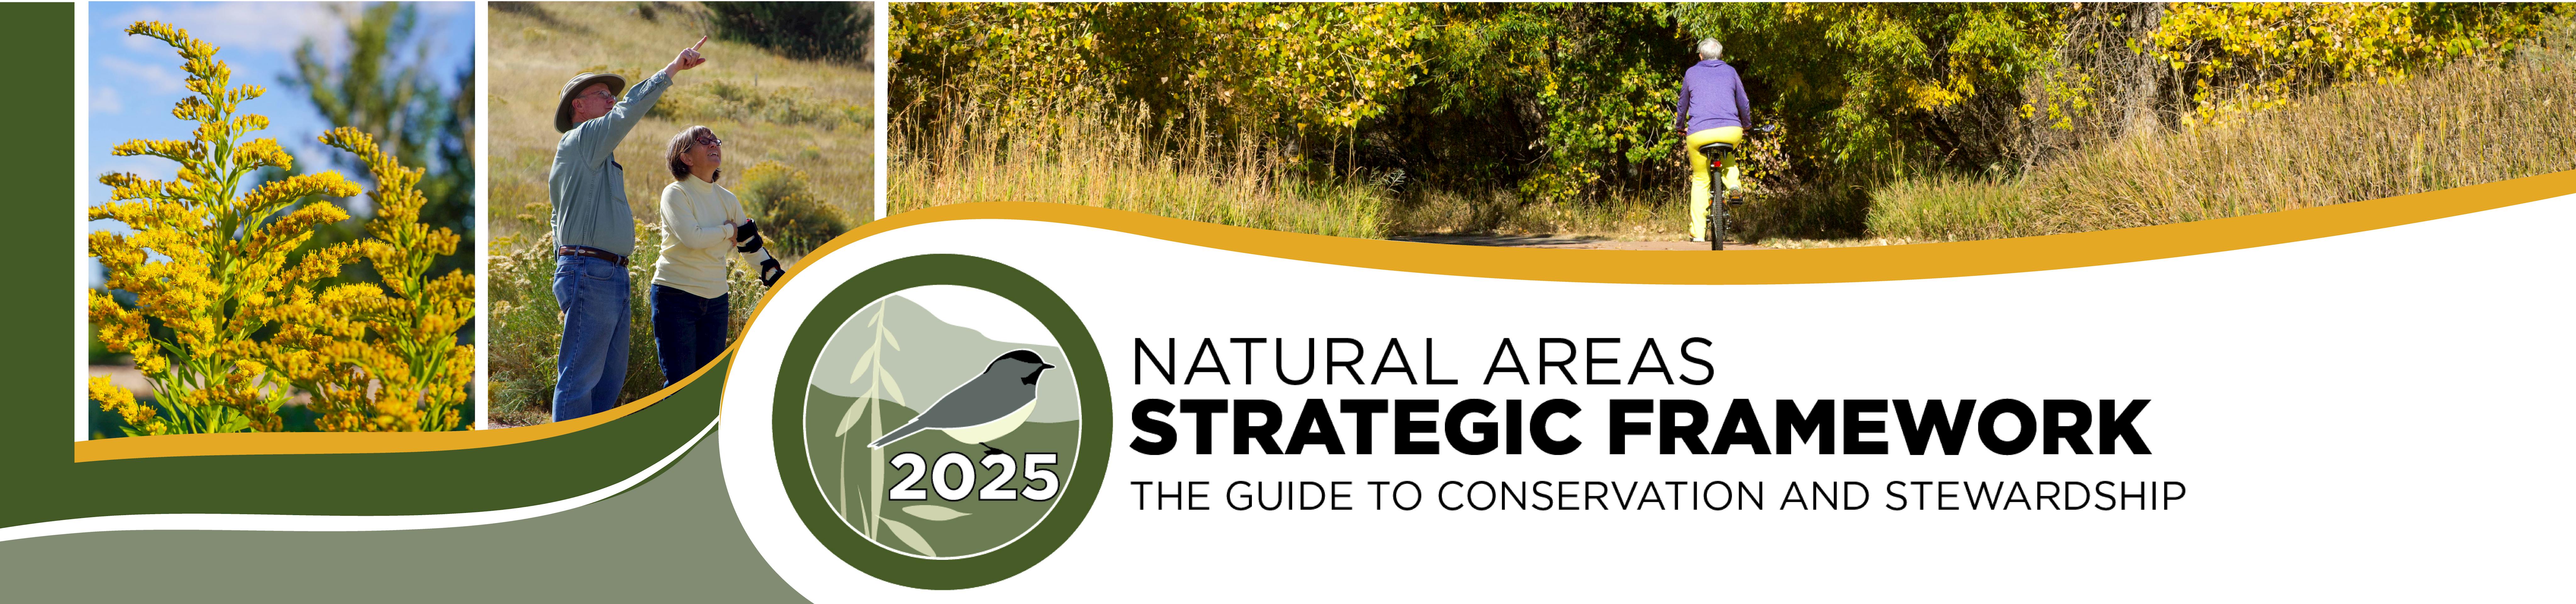 text Natural Areas Strategic Framework The Guide to Conservation and Stewardship image of bike rider birders and yellow plant